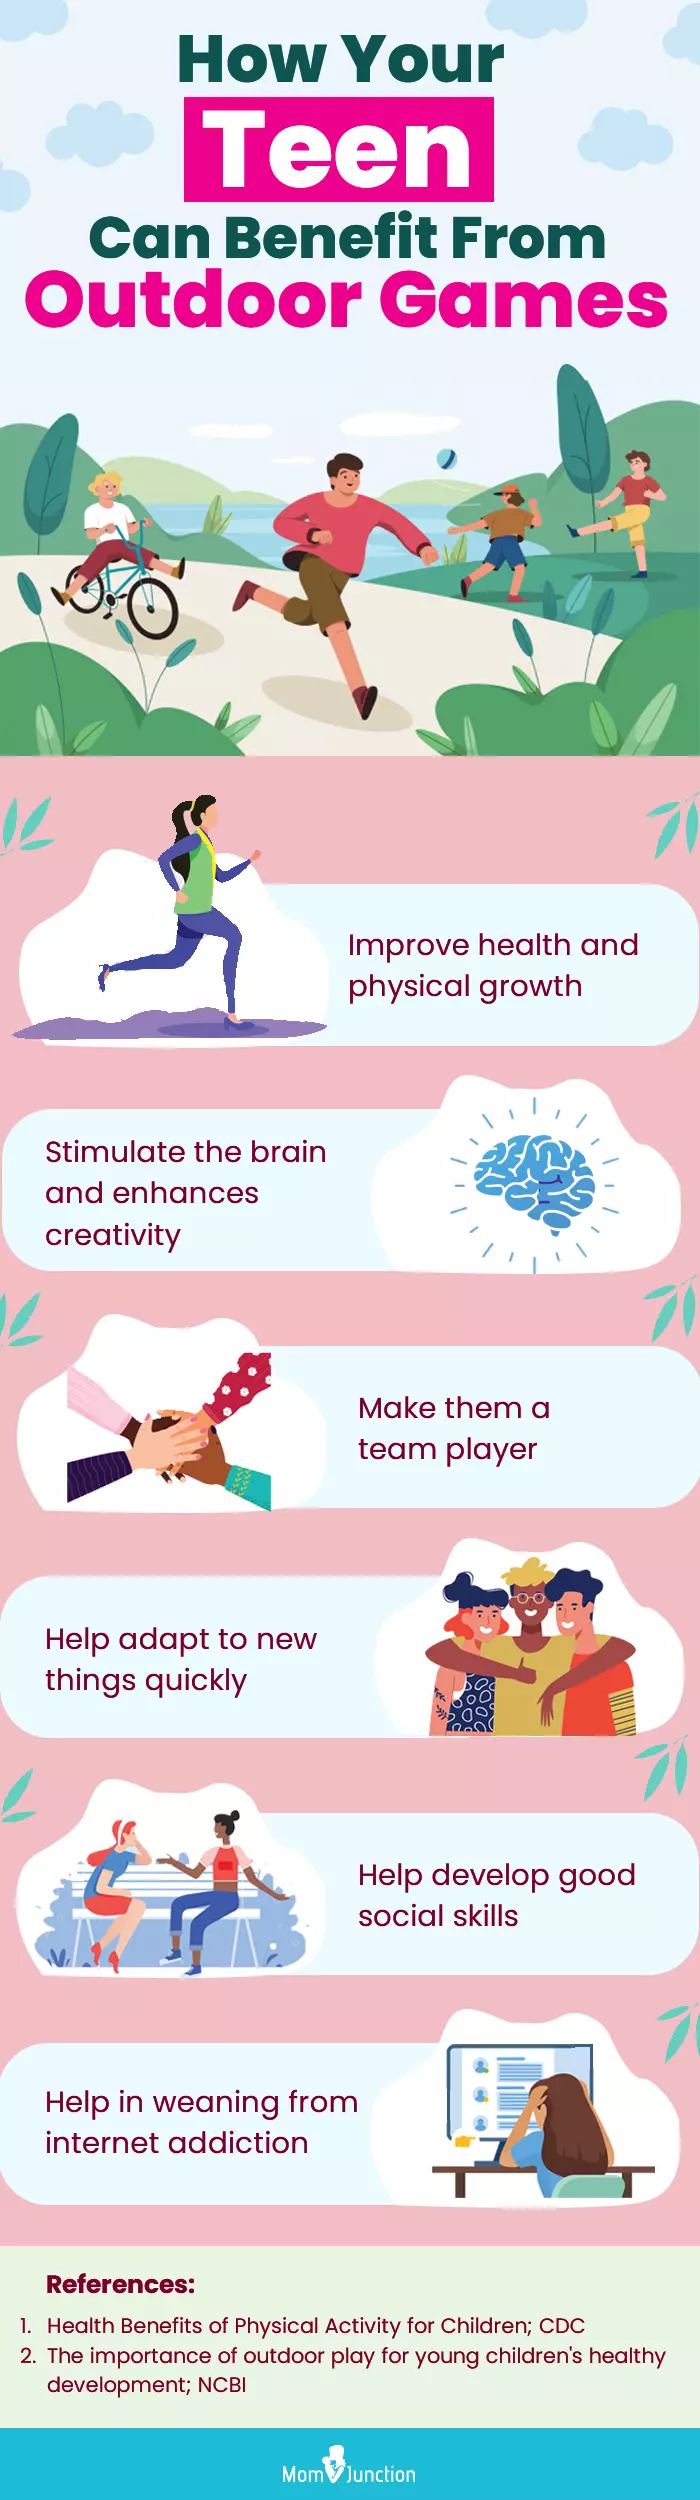 how your teen can benefit from outdoor games (infographic)